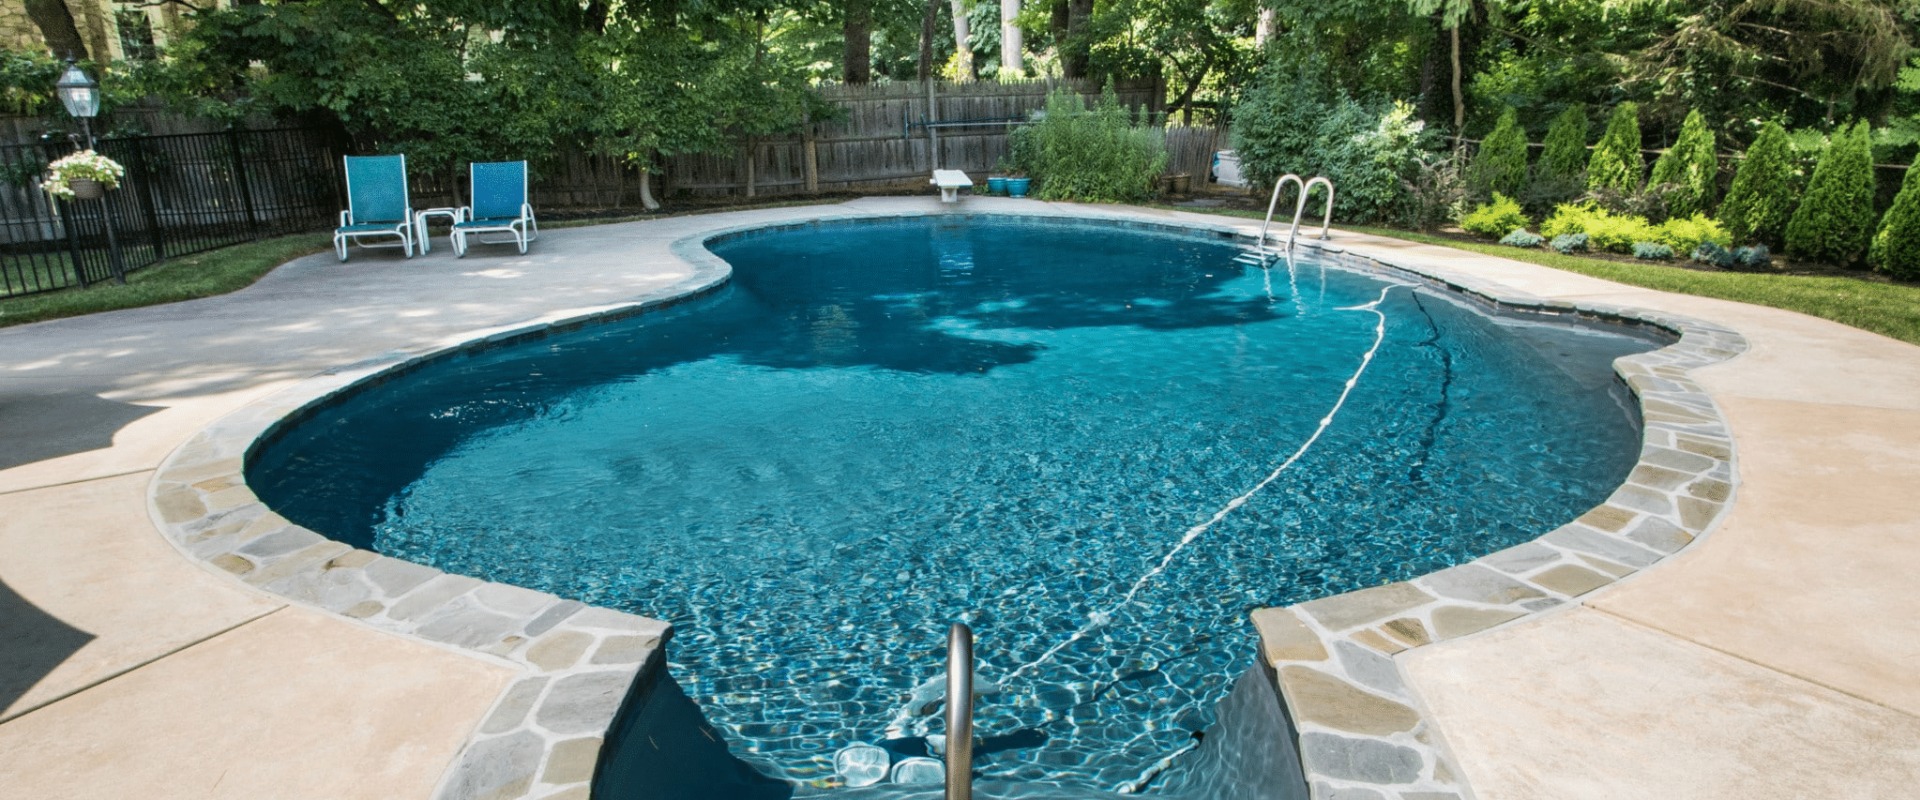 What is the best stone for pool coping?